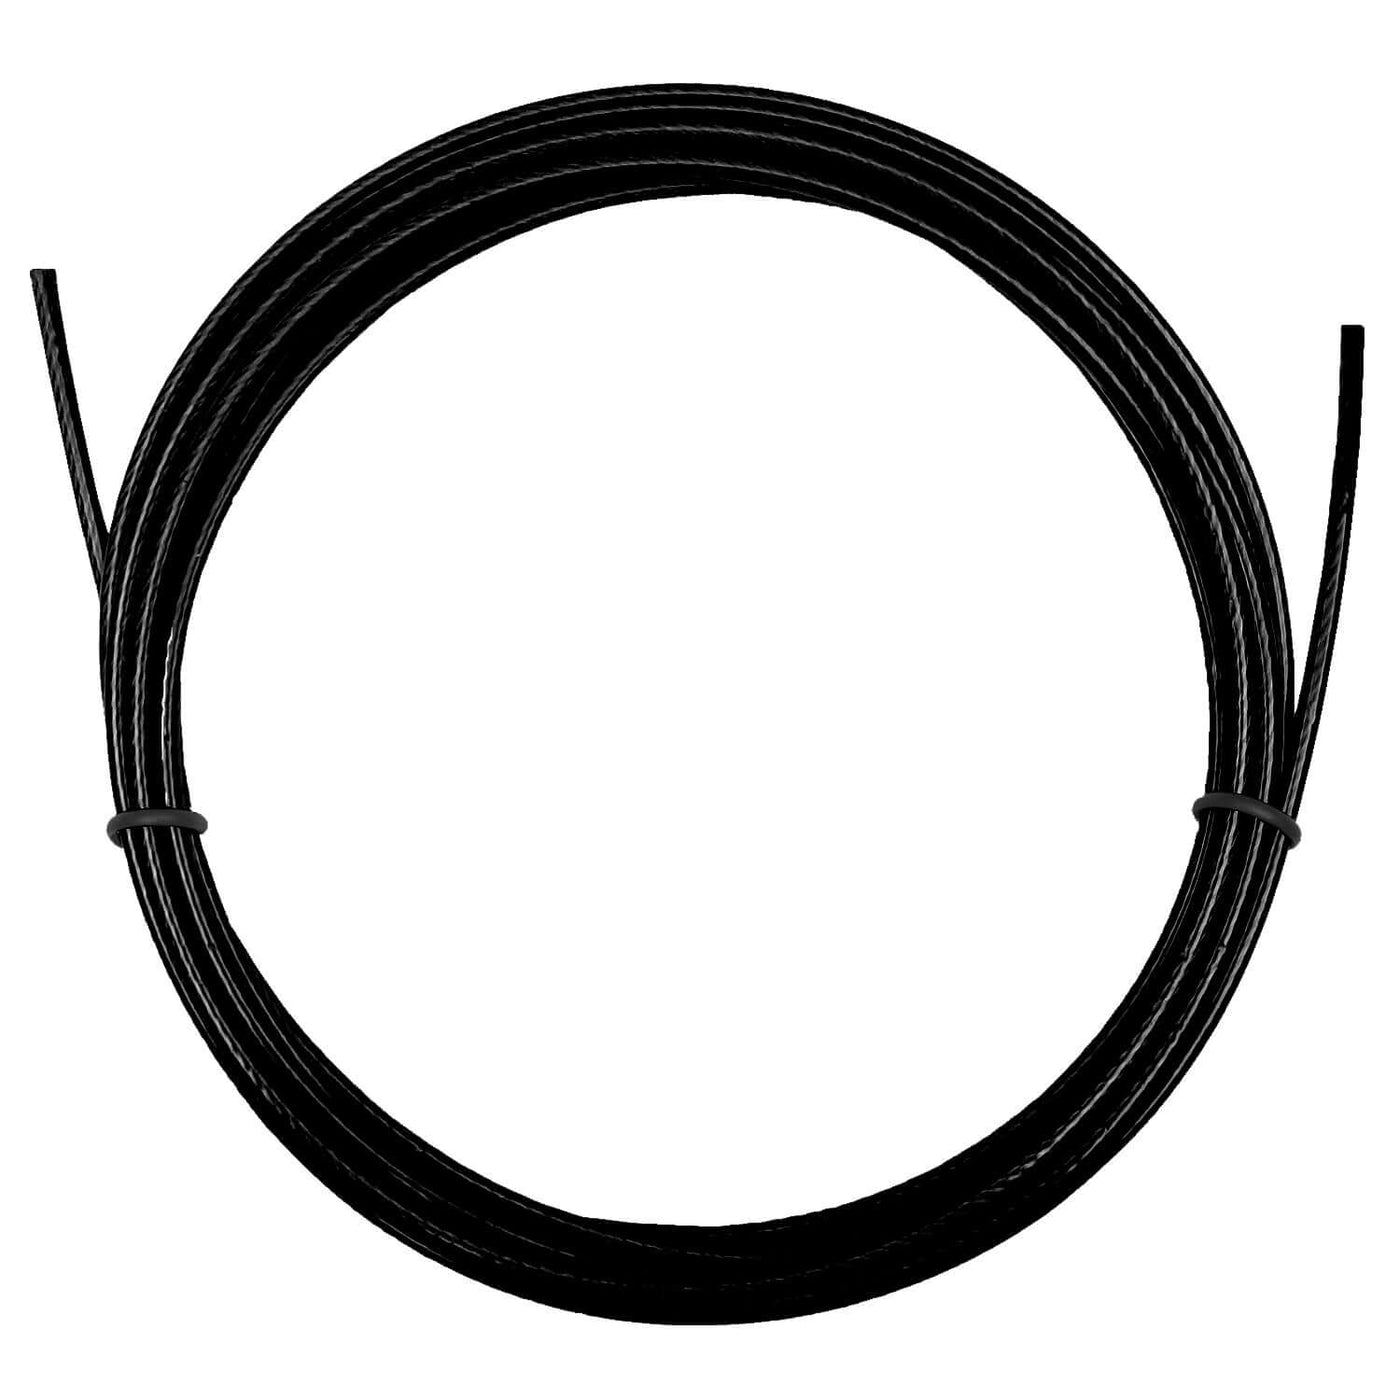 Murgs Replacement Skipping Rope Cable 2.5mm Black